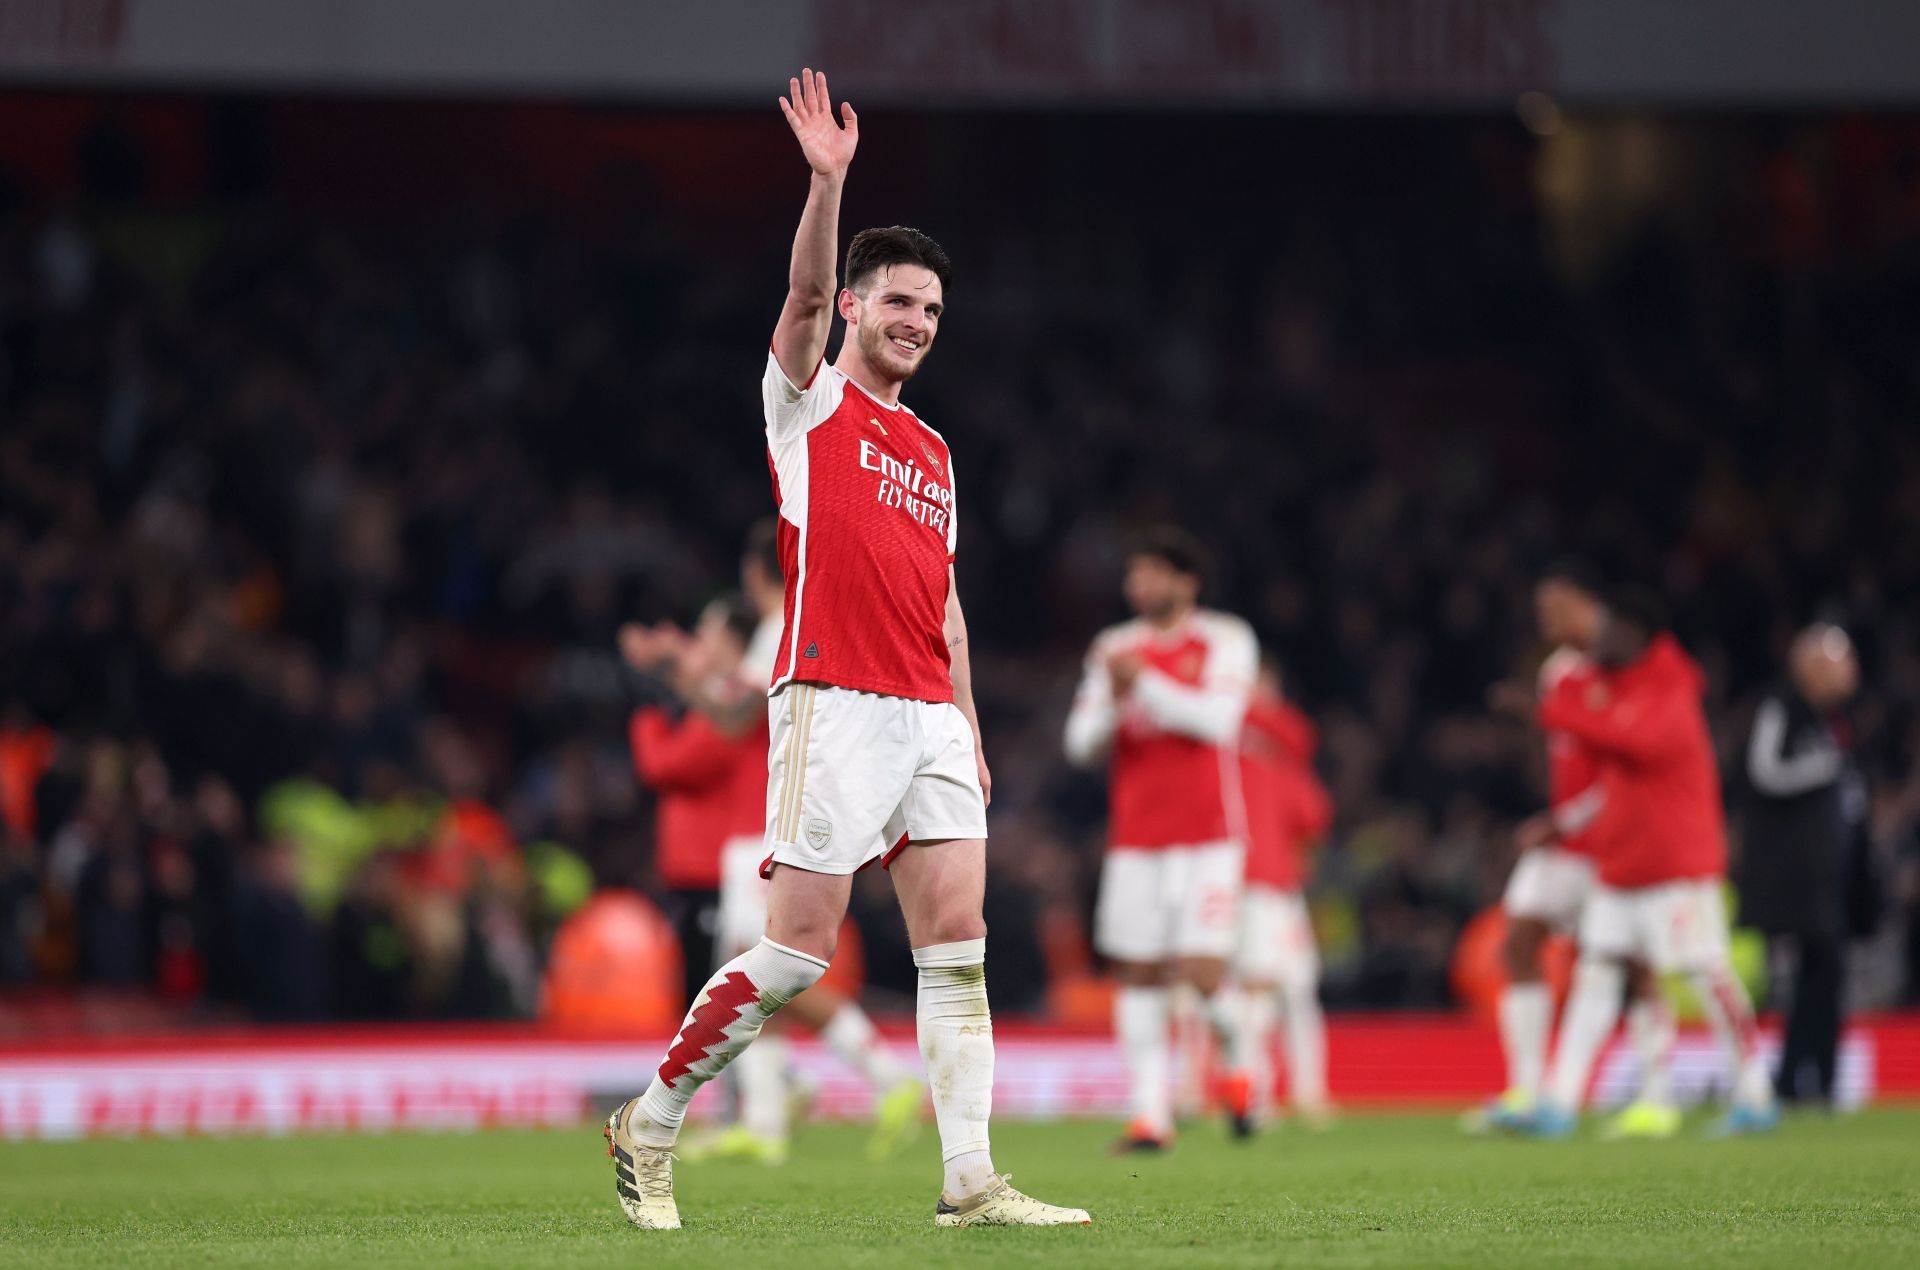 Declan Rice has hit the ground running at the Emirates.